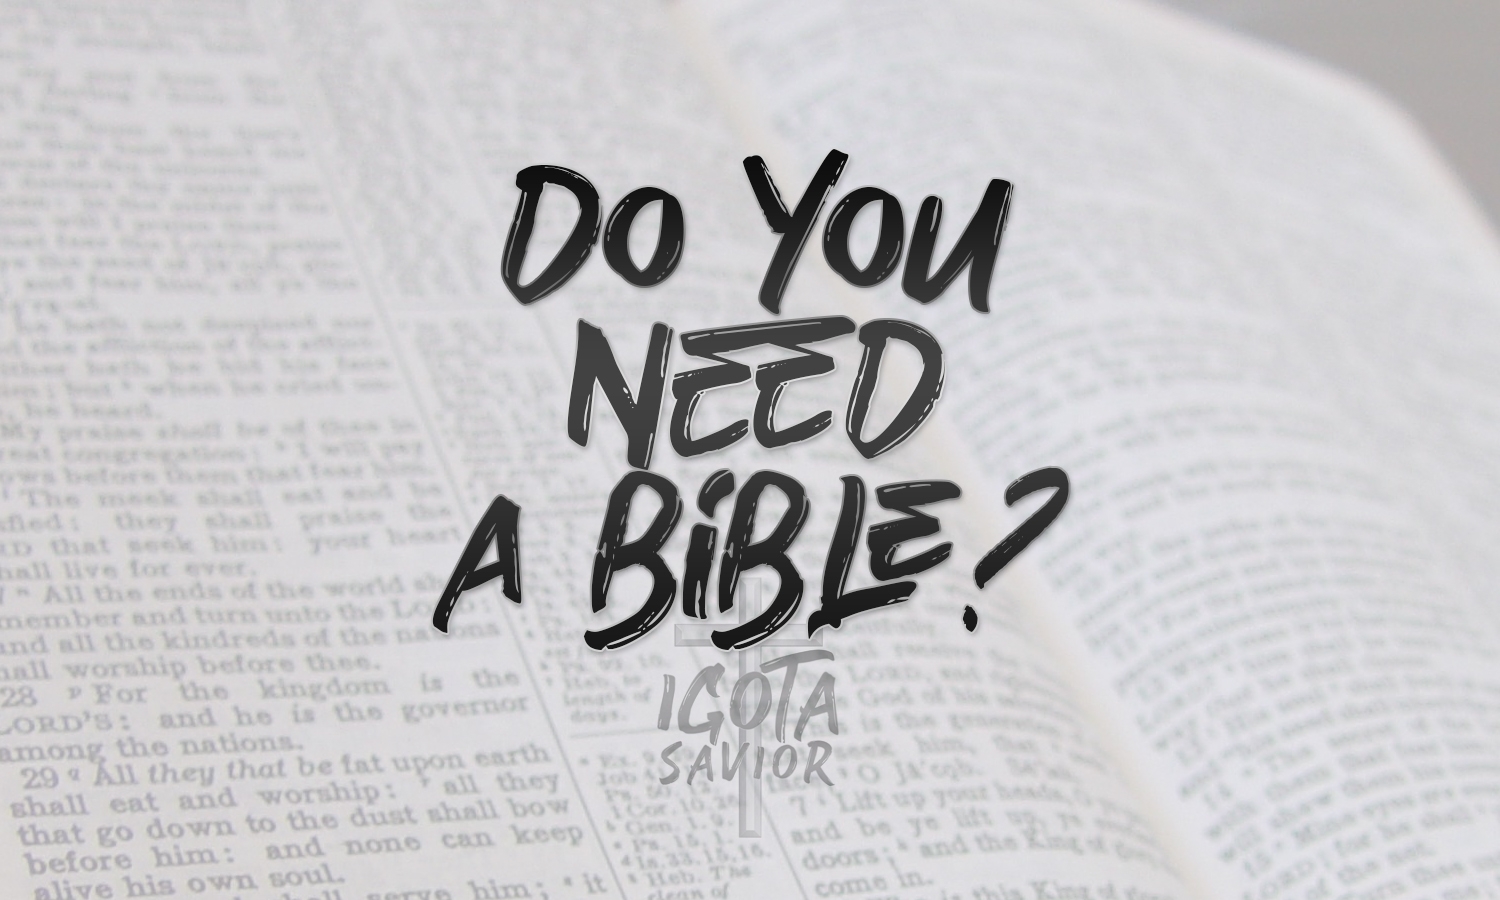 Do You Need A Bible?